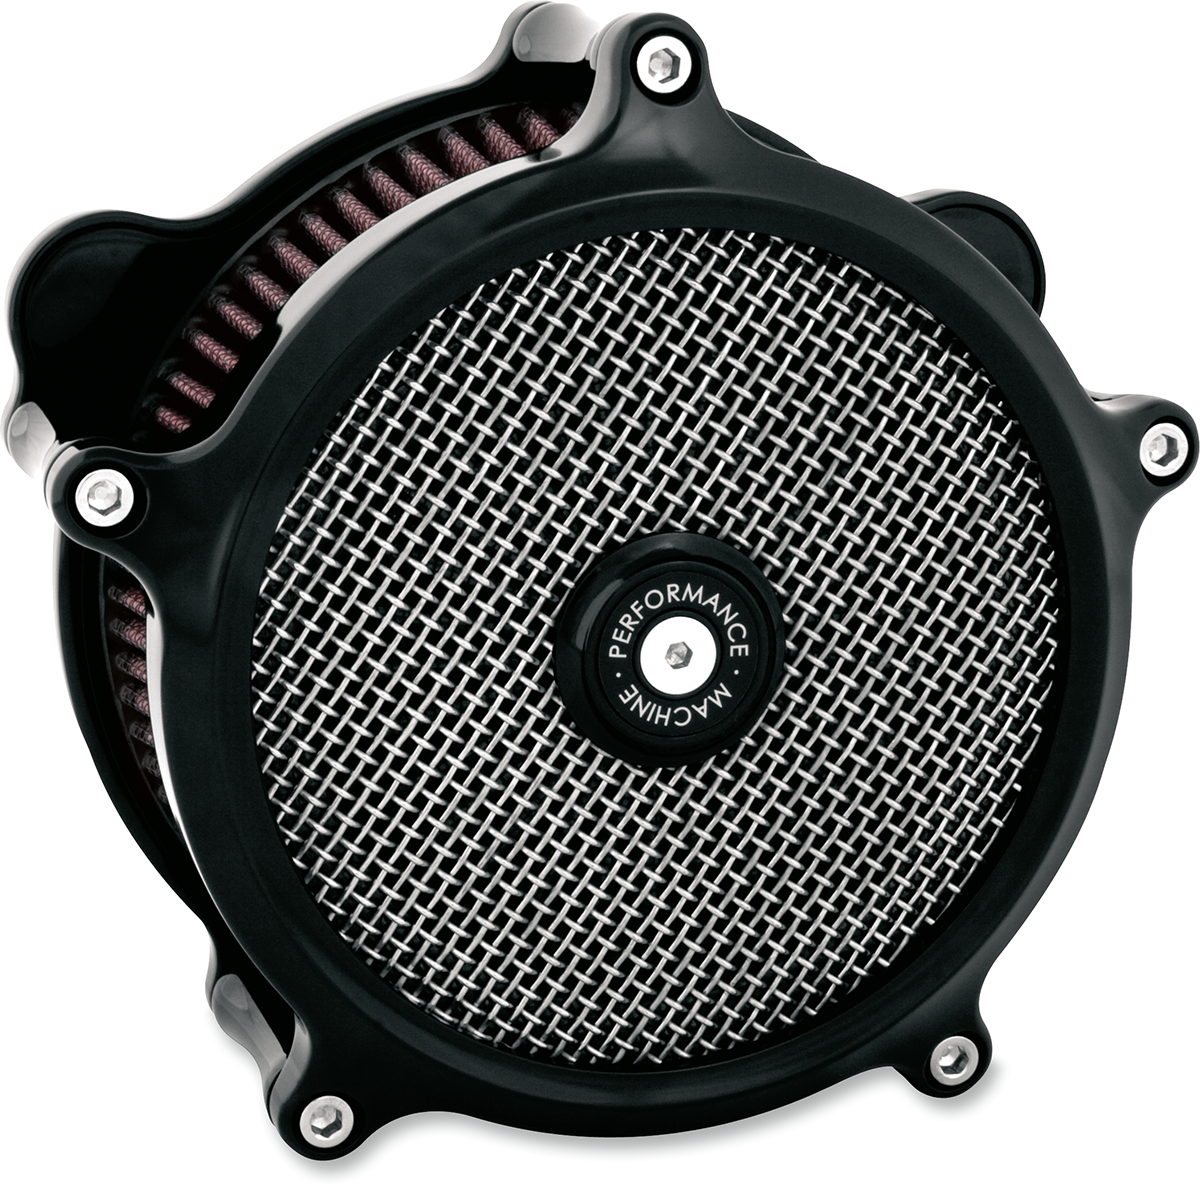 Performance Machine Super Gas Air Filter Cleaner Kit 99-17 Harley Touring FLHX